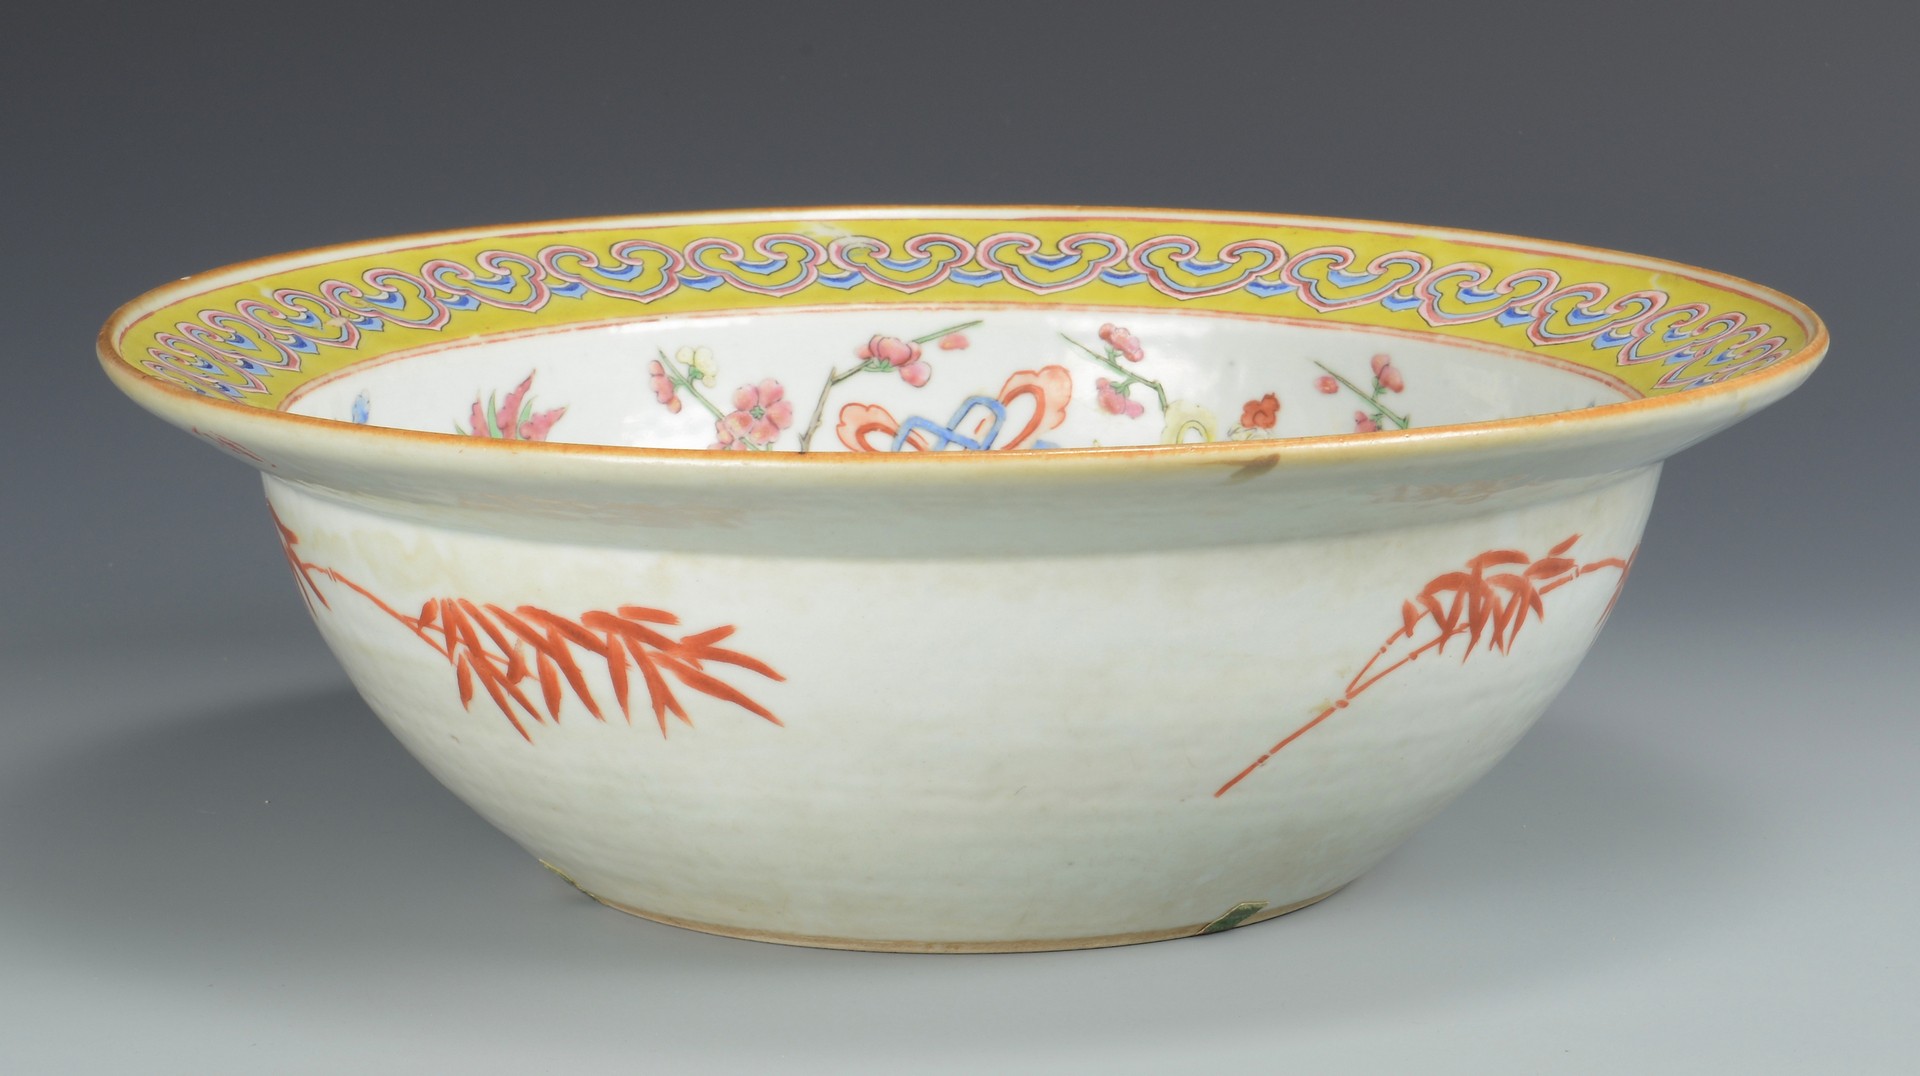 Lot 29: Large Qing Bowl with butterflies, yellow rim